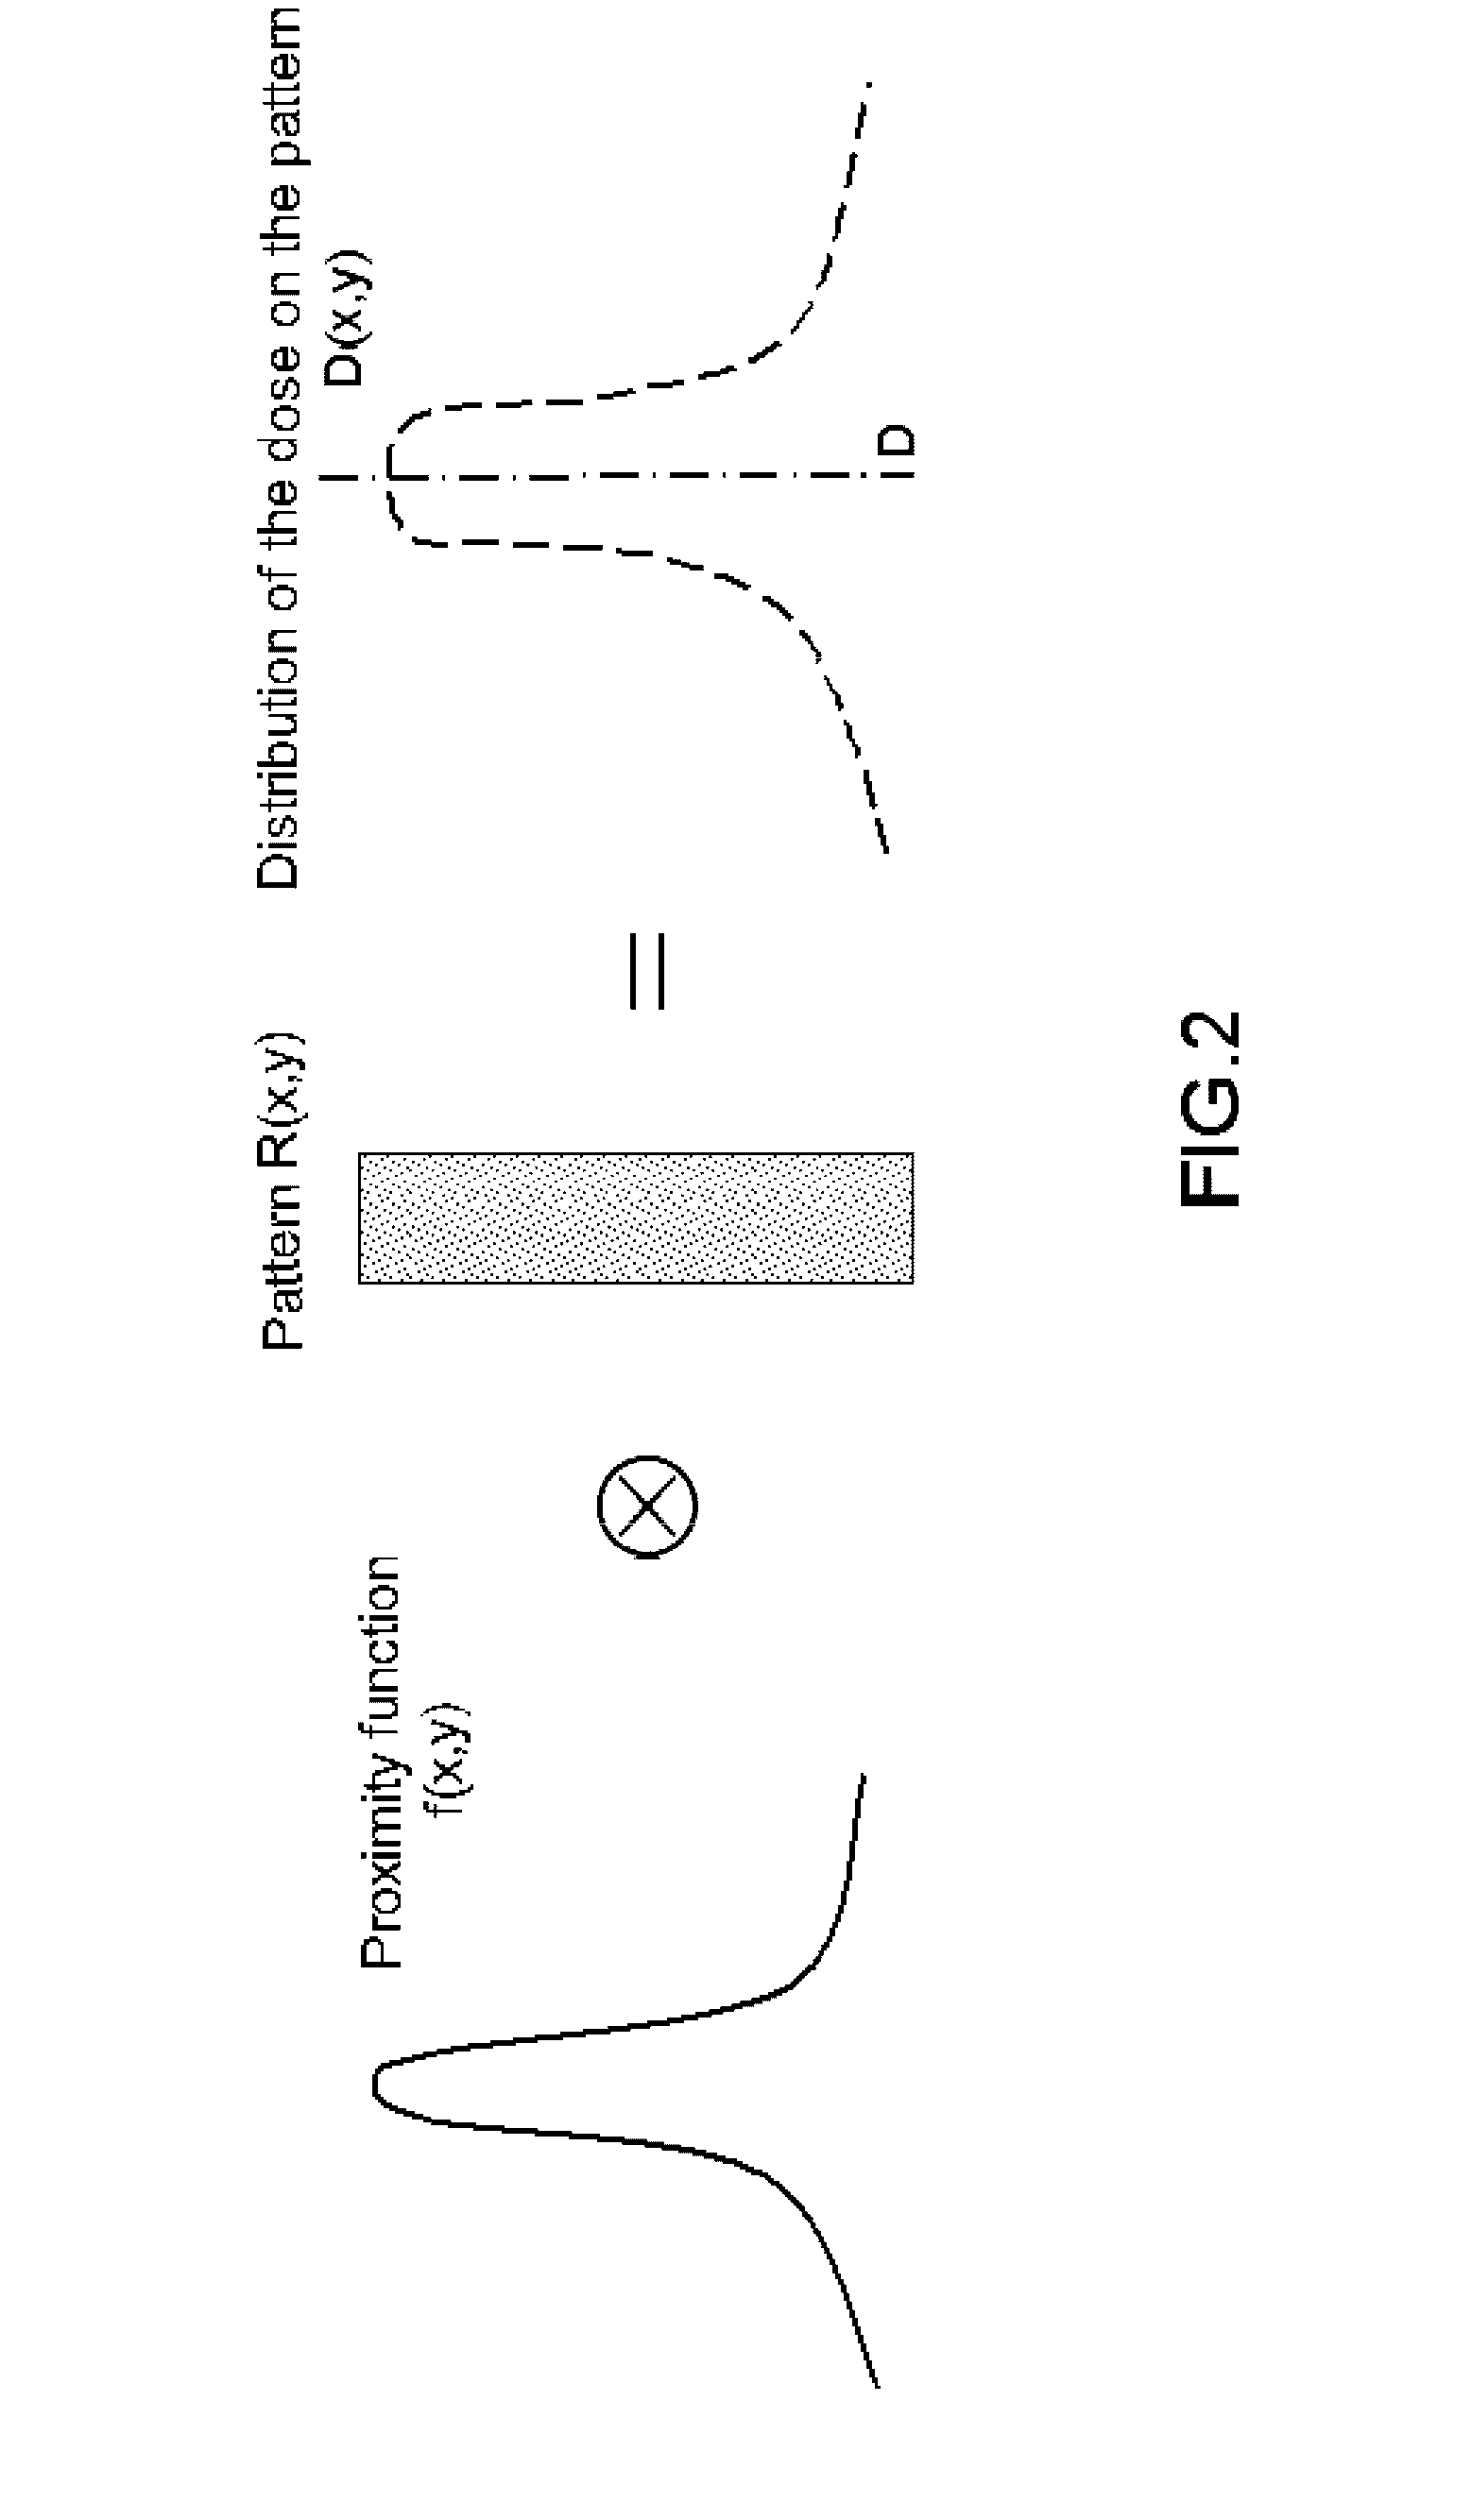 Lithography method with combined optimization of radiated energy and design geometry